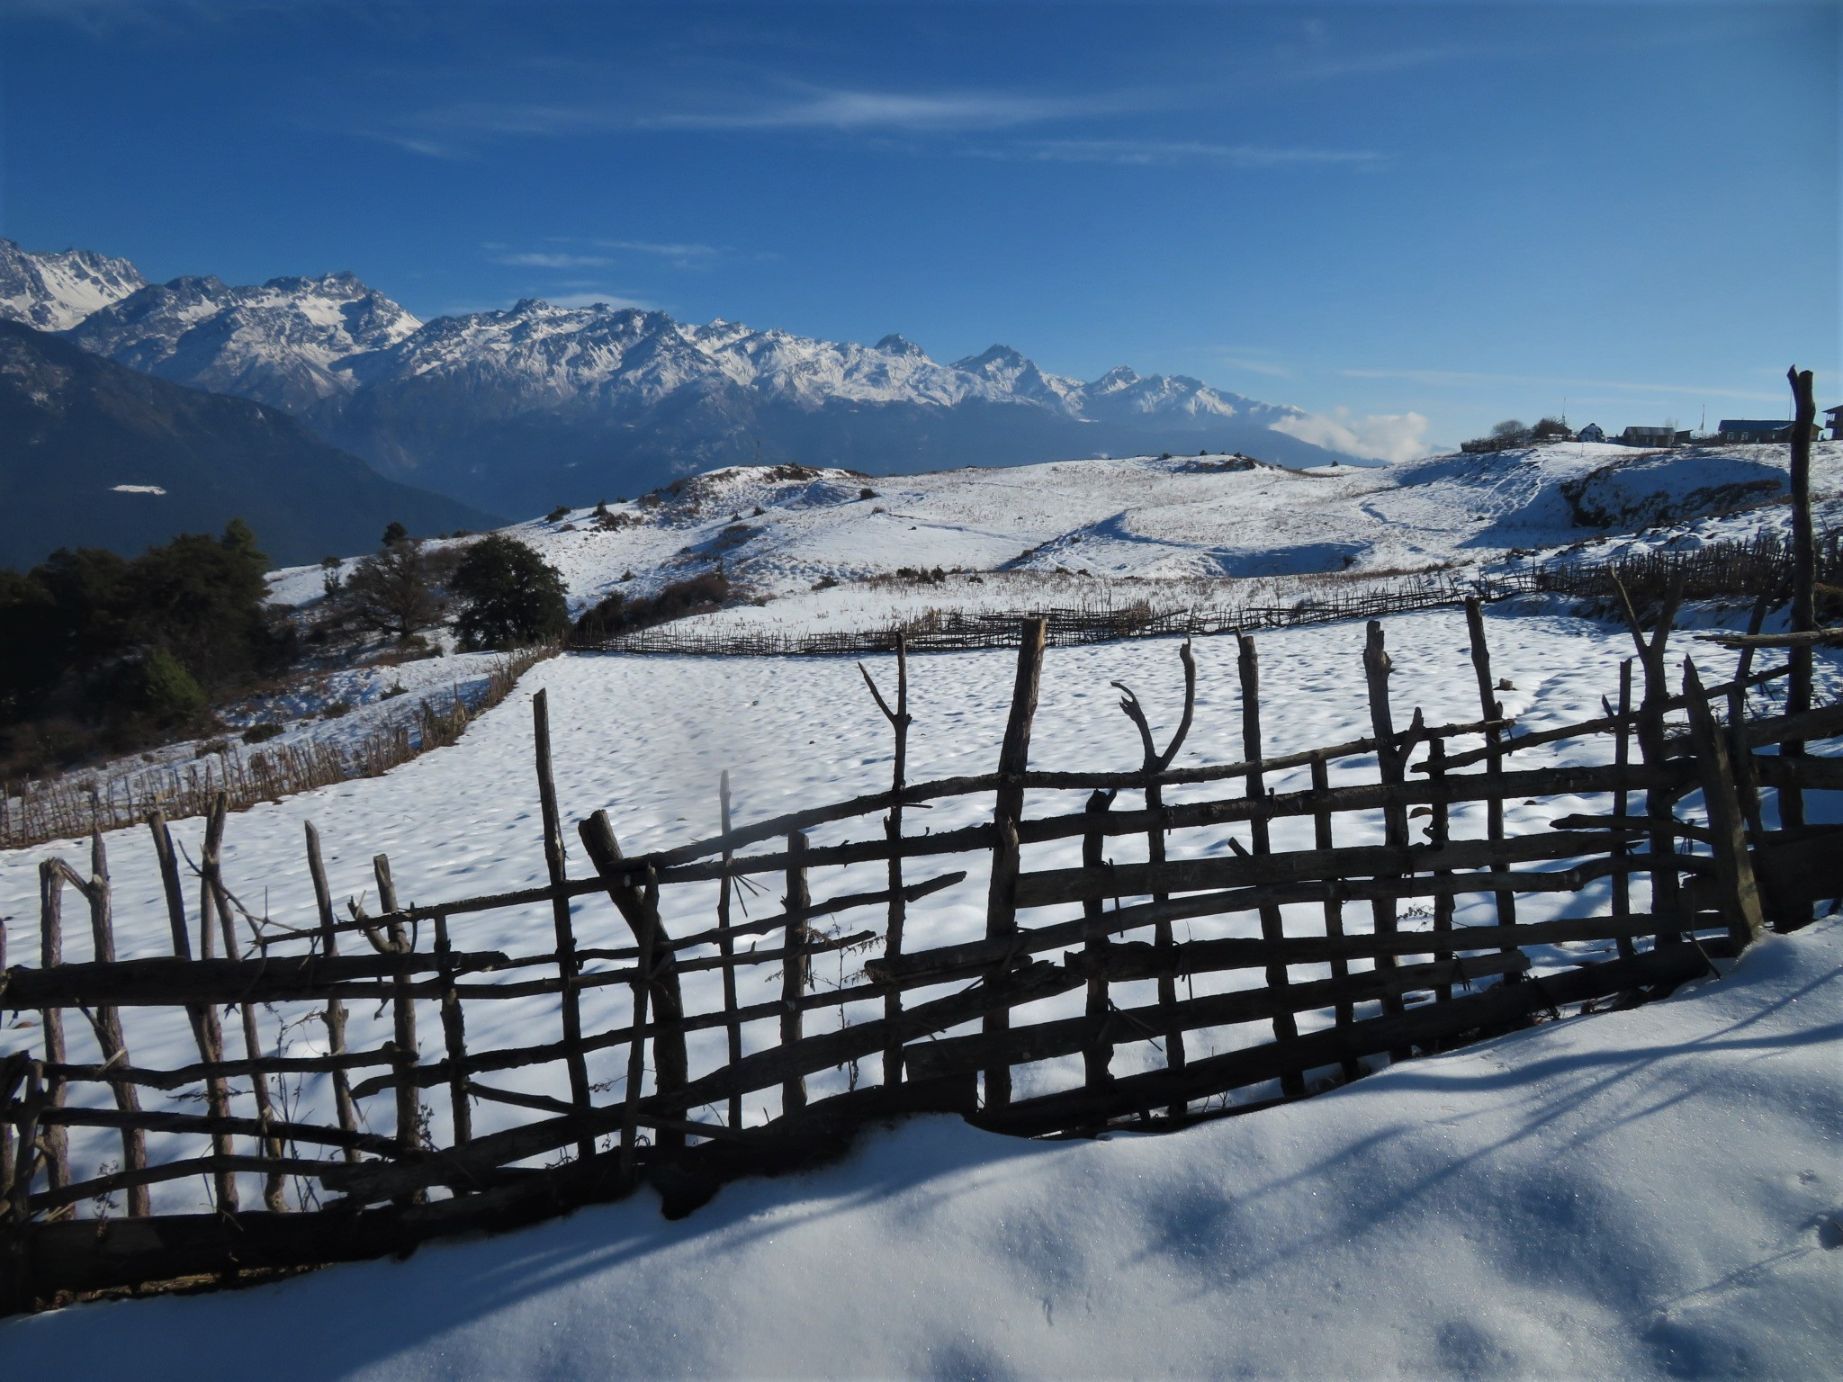 A snowy landscape along the route of the Tamang Heritage Trail, in Nepal's Langtang area.